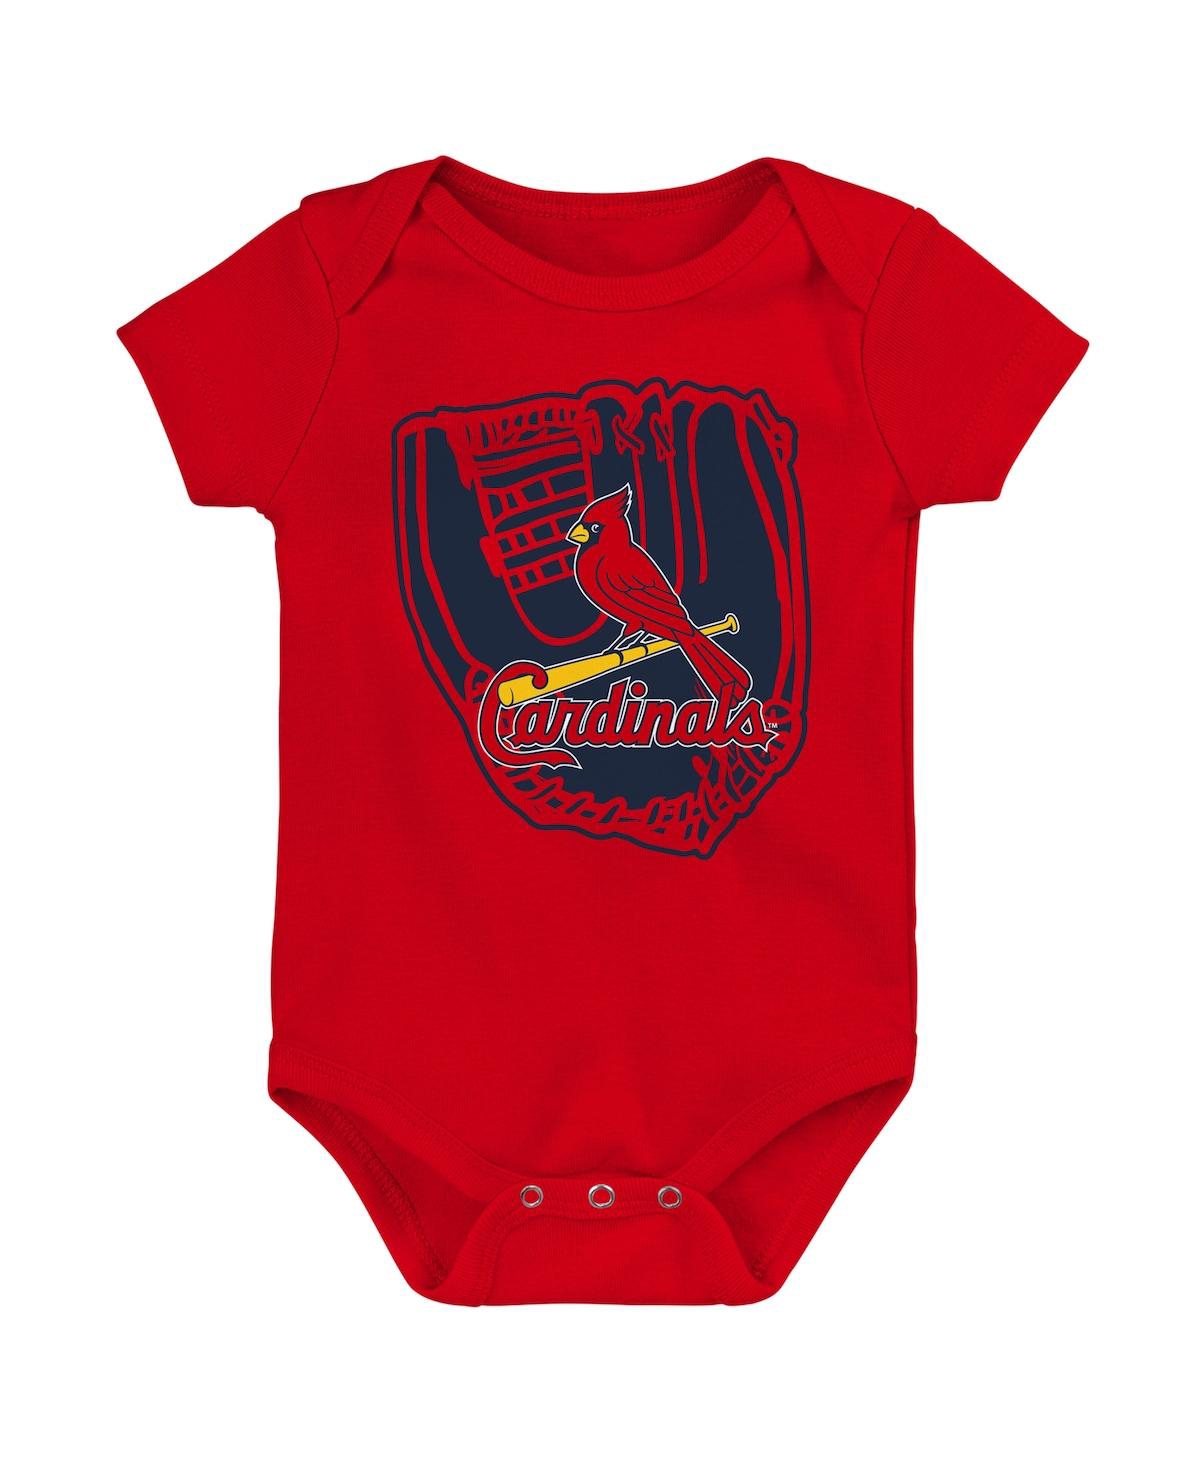 Shop Outerstuff Newborn And Infant Boys And Girls Navy, Red, White St. Louis Cardinals Minor League Player Three-pac In Navy,red,white